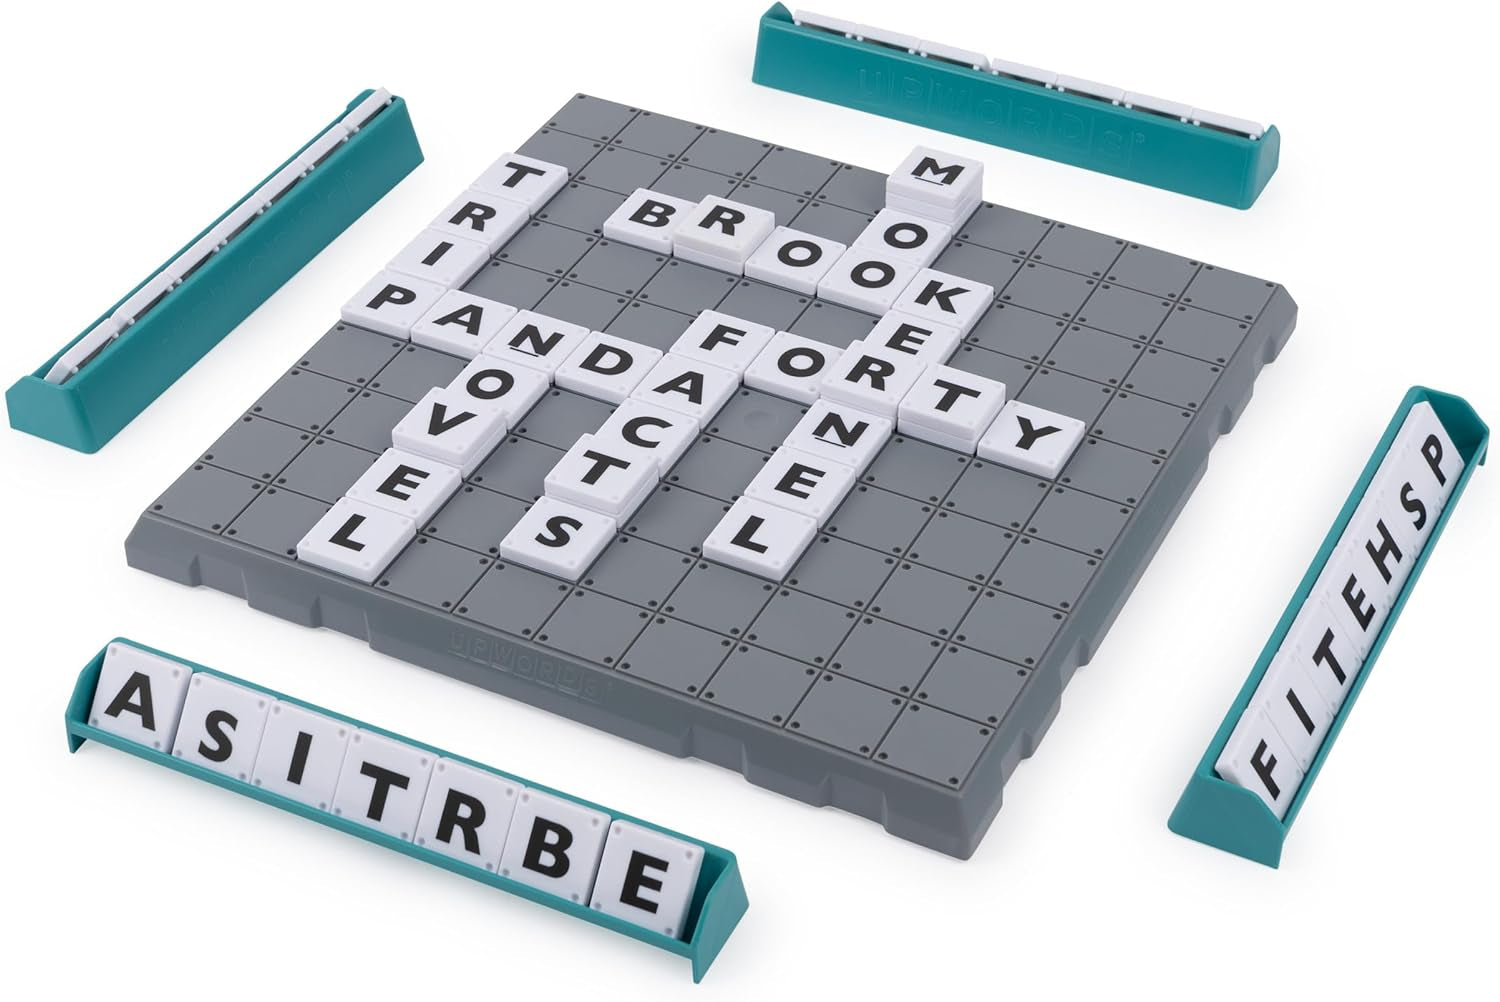 Upwords, Word Game with Stackable Letter Tiles & Rotating Game Board, New 2023 Version | Games for Family Game Night | Family Games, for Adults and Kids Ages 8 and Up